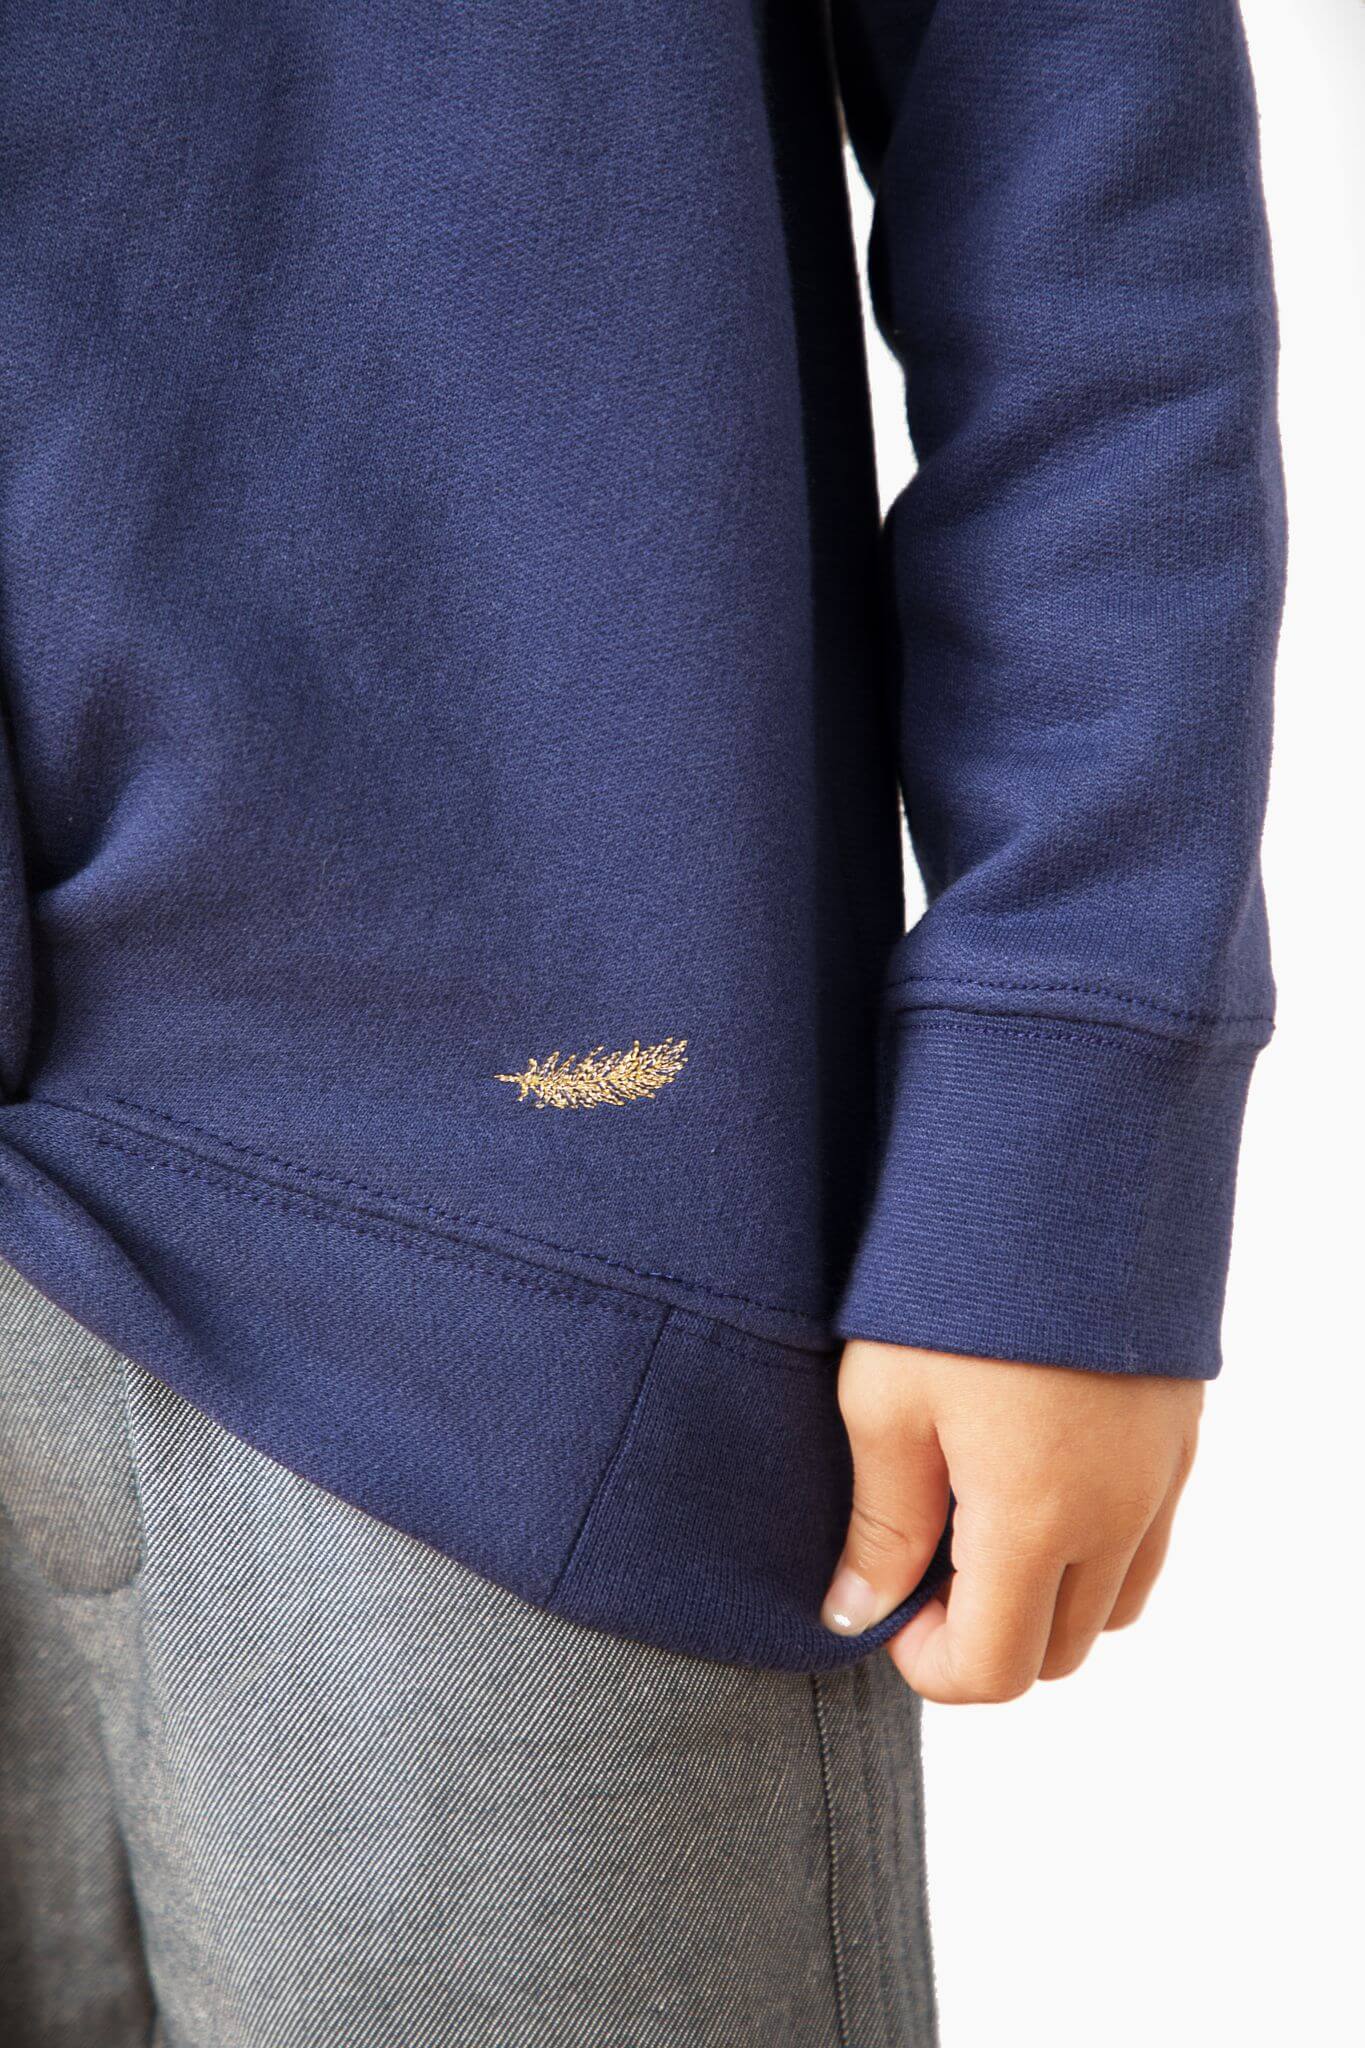 Kids sweatshirts. 100% Organic cotton fleece, cut and sew in NYC. Deep blue color. Golden feather embroidery as a nice and stylish detail.